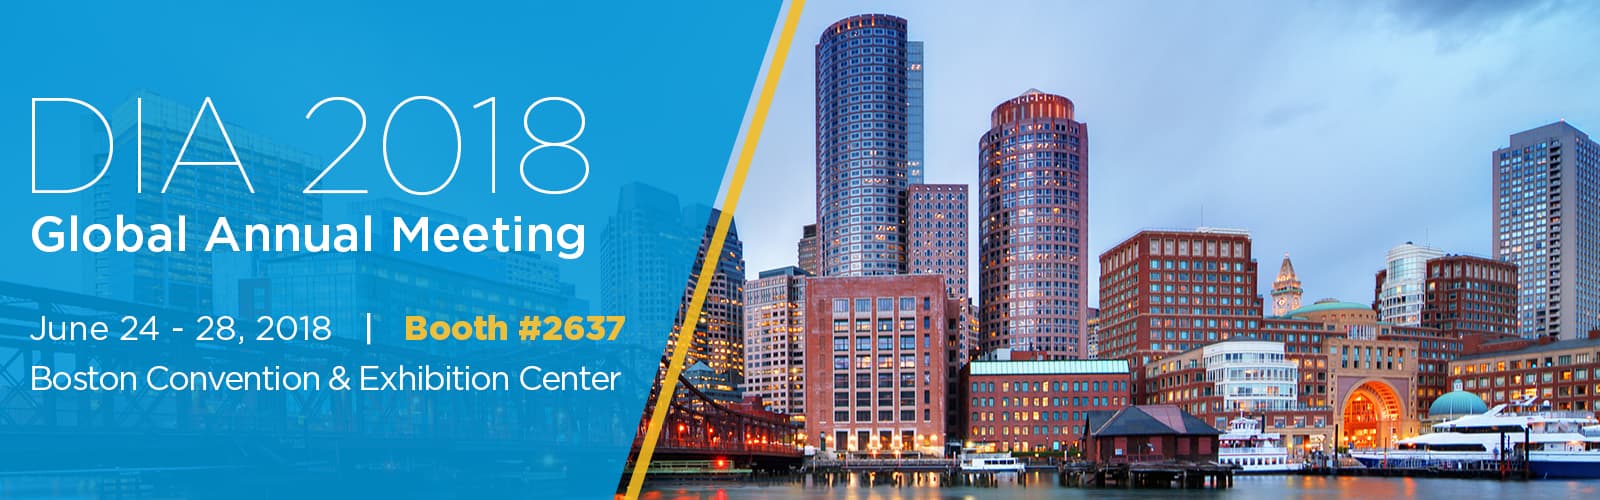 CSOFT to Exhibit at the DIA Annual Meeting in Boston